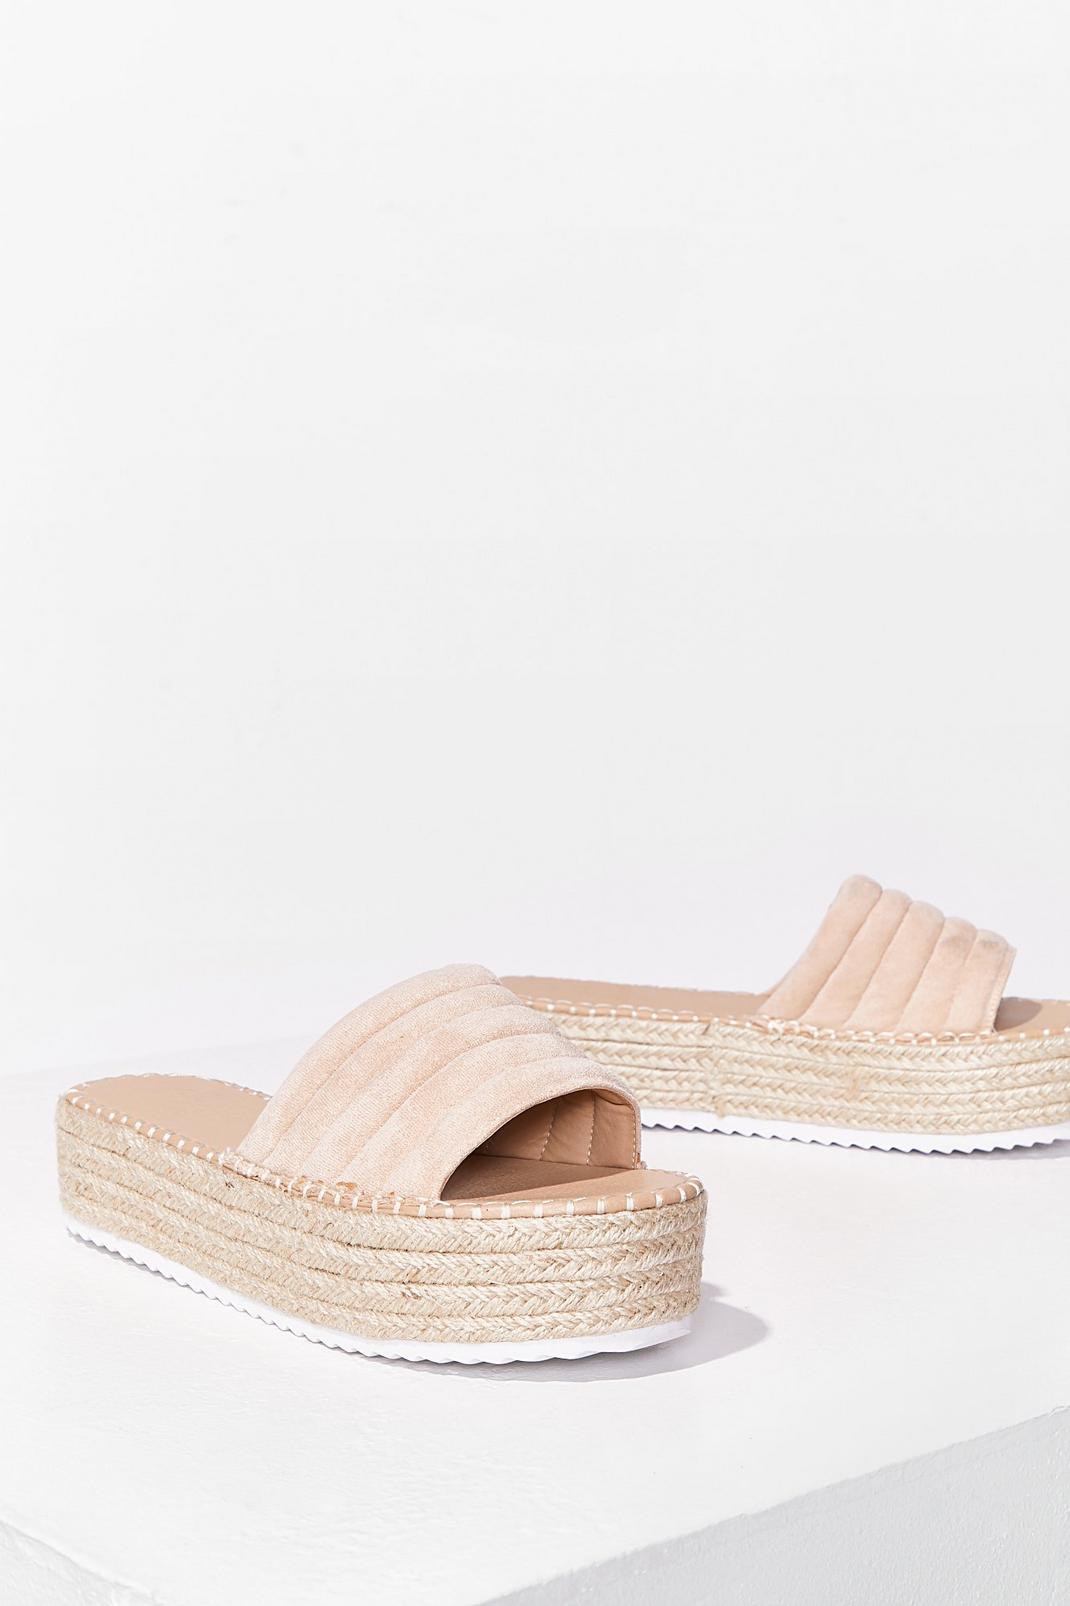 Pad Girls Do It Well Espadrille Sliders image number 1